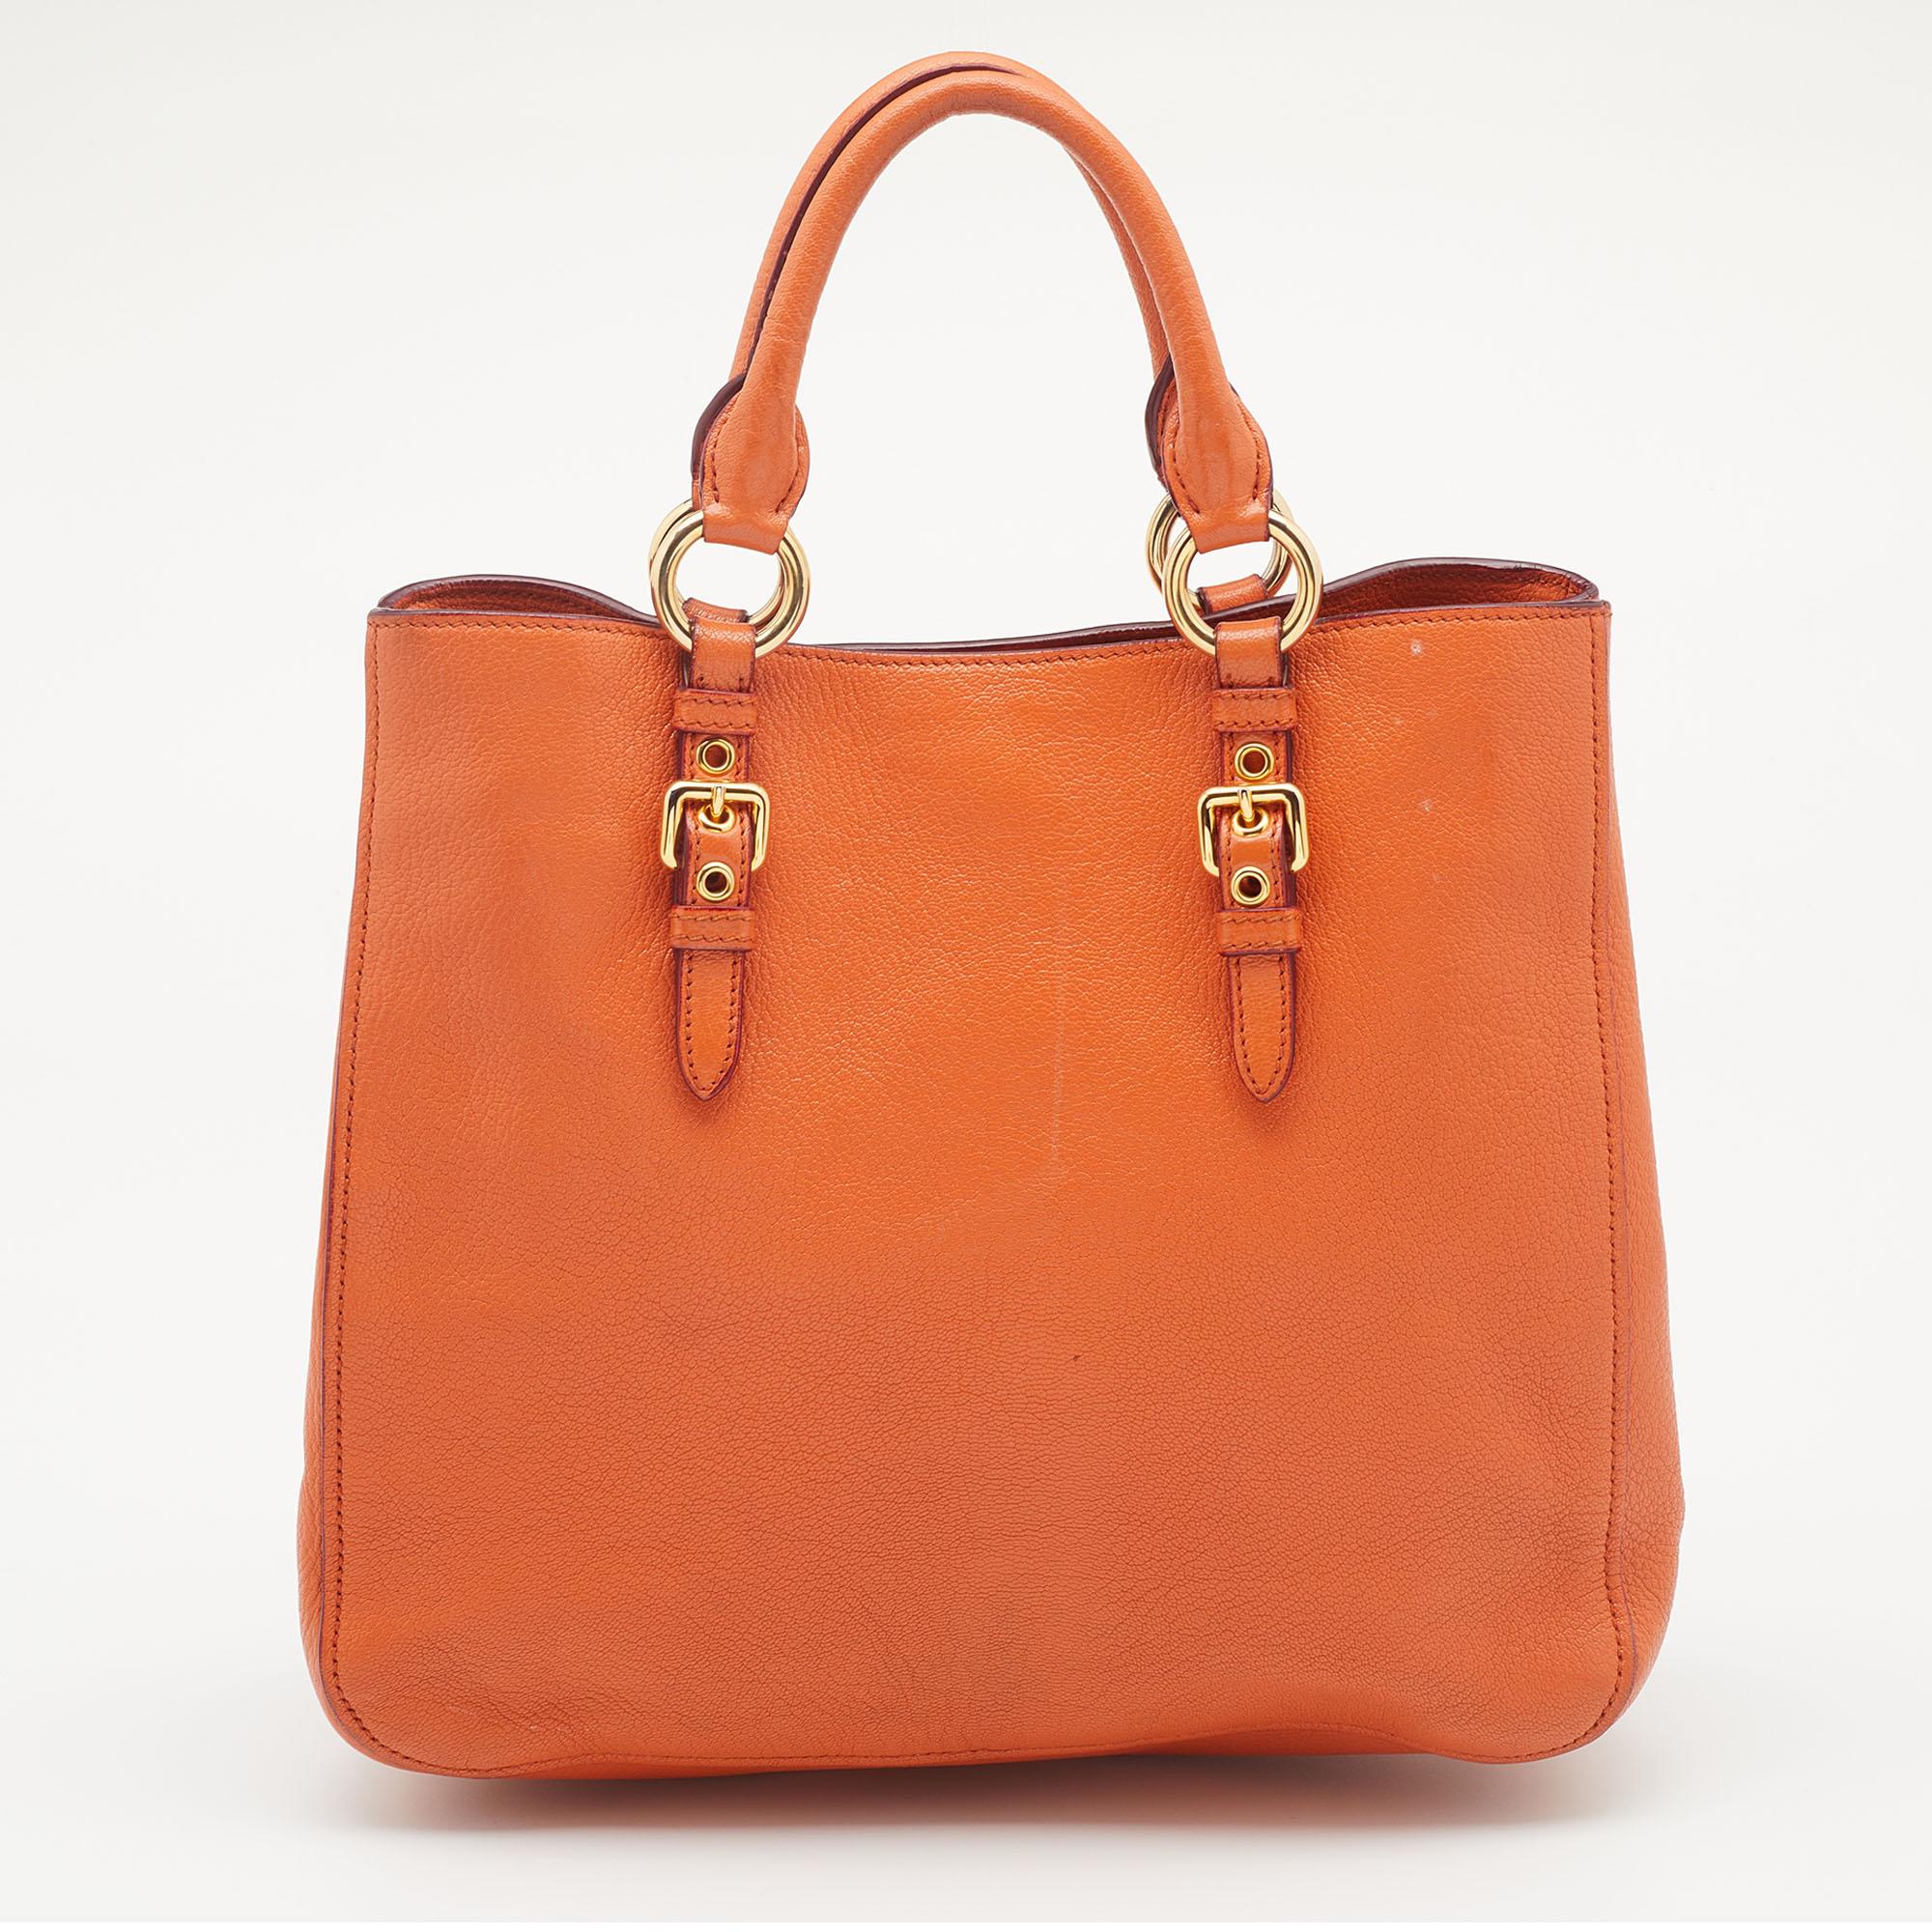 This Madras tote from the House of Miu Miu is attractive, sturdy, and practical for everyday use. It is crafted using orange leather on the exterior. It showcases two handles, gold-toned hardware, and a satin-lined interior. It is provided with an